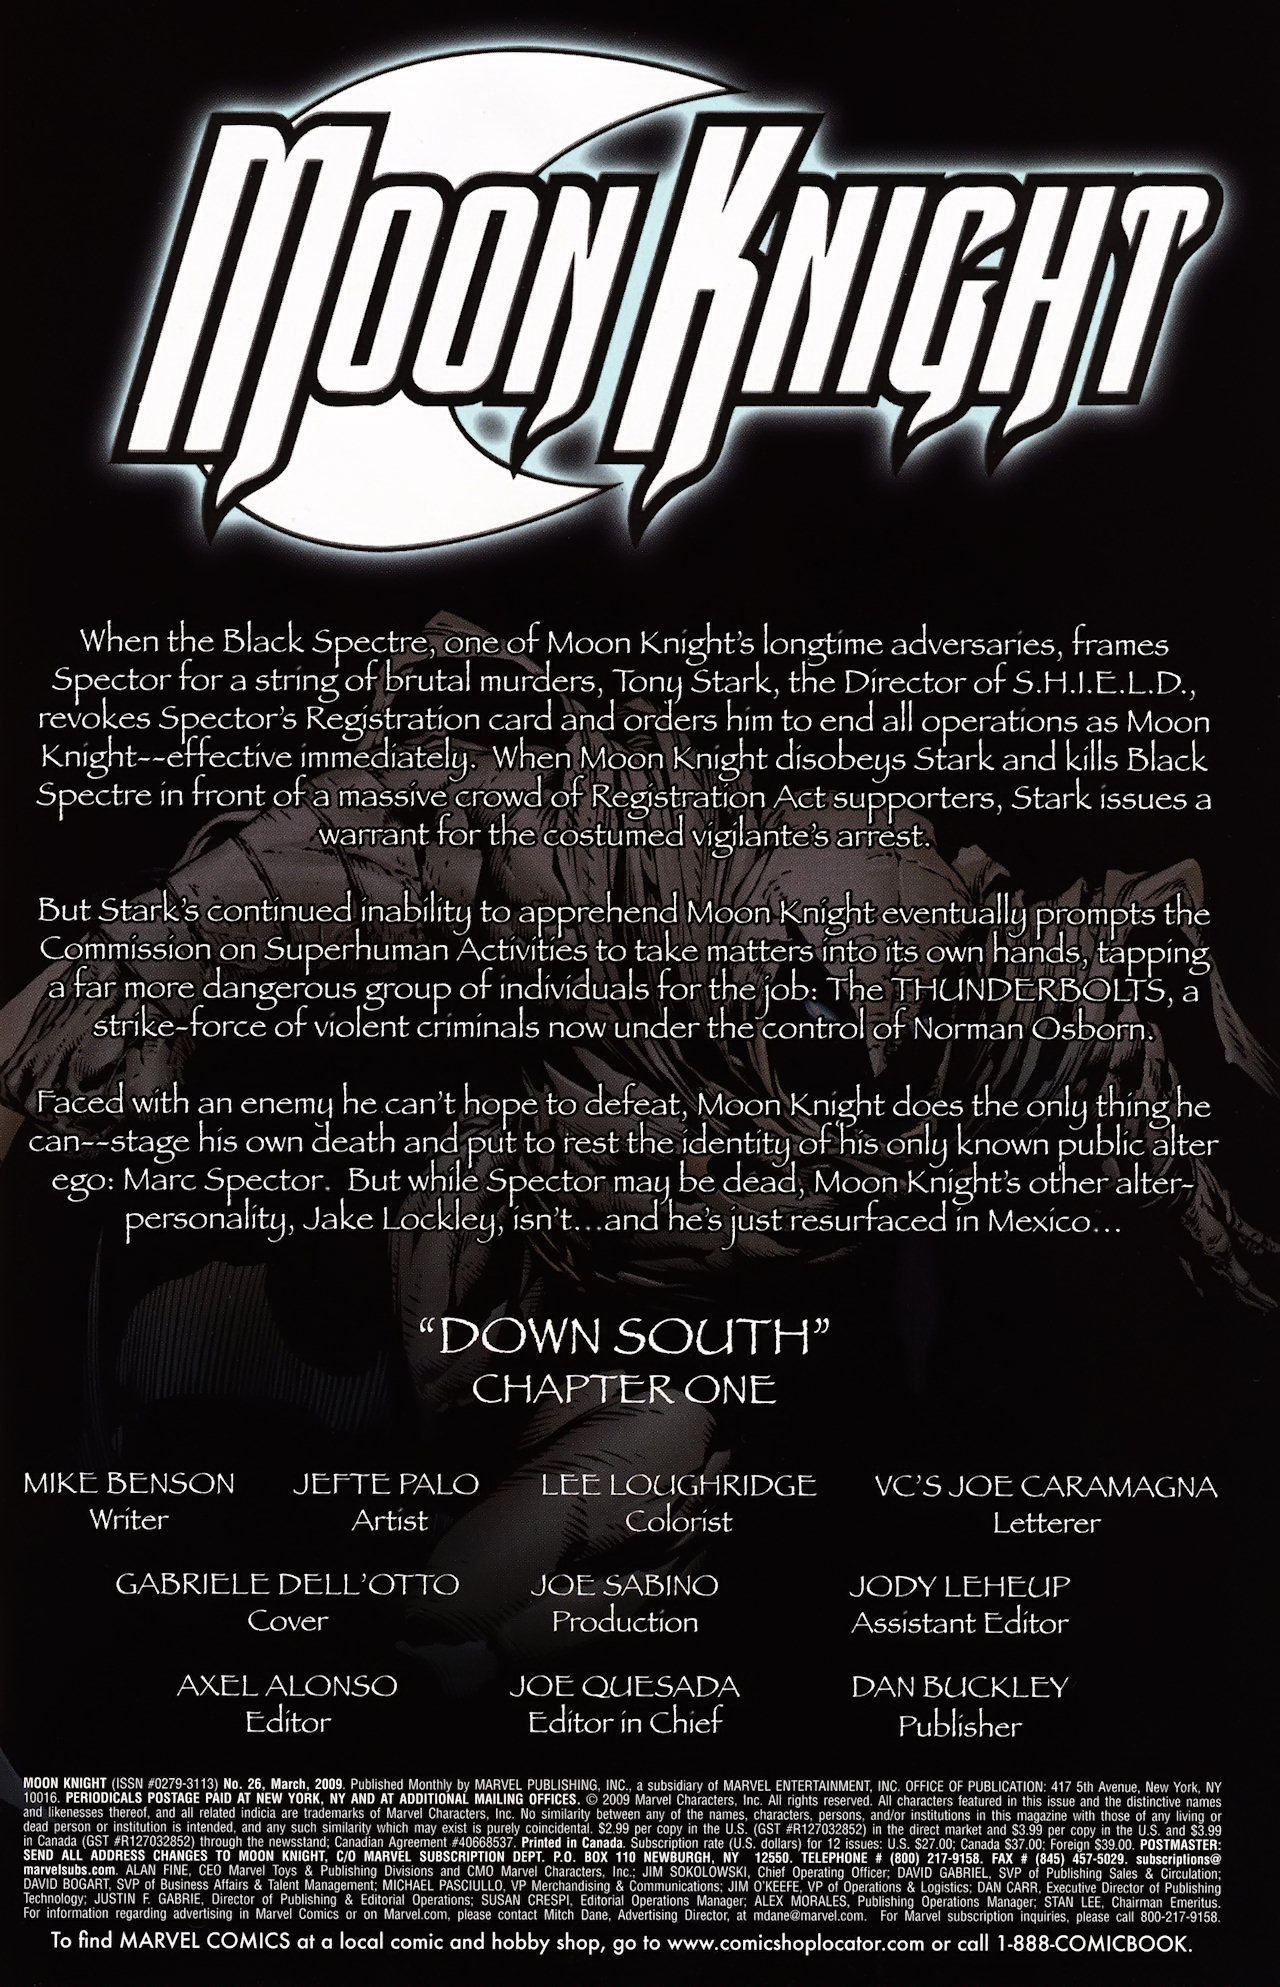 Moon Knight #26 - Down South, Part 1